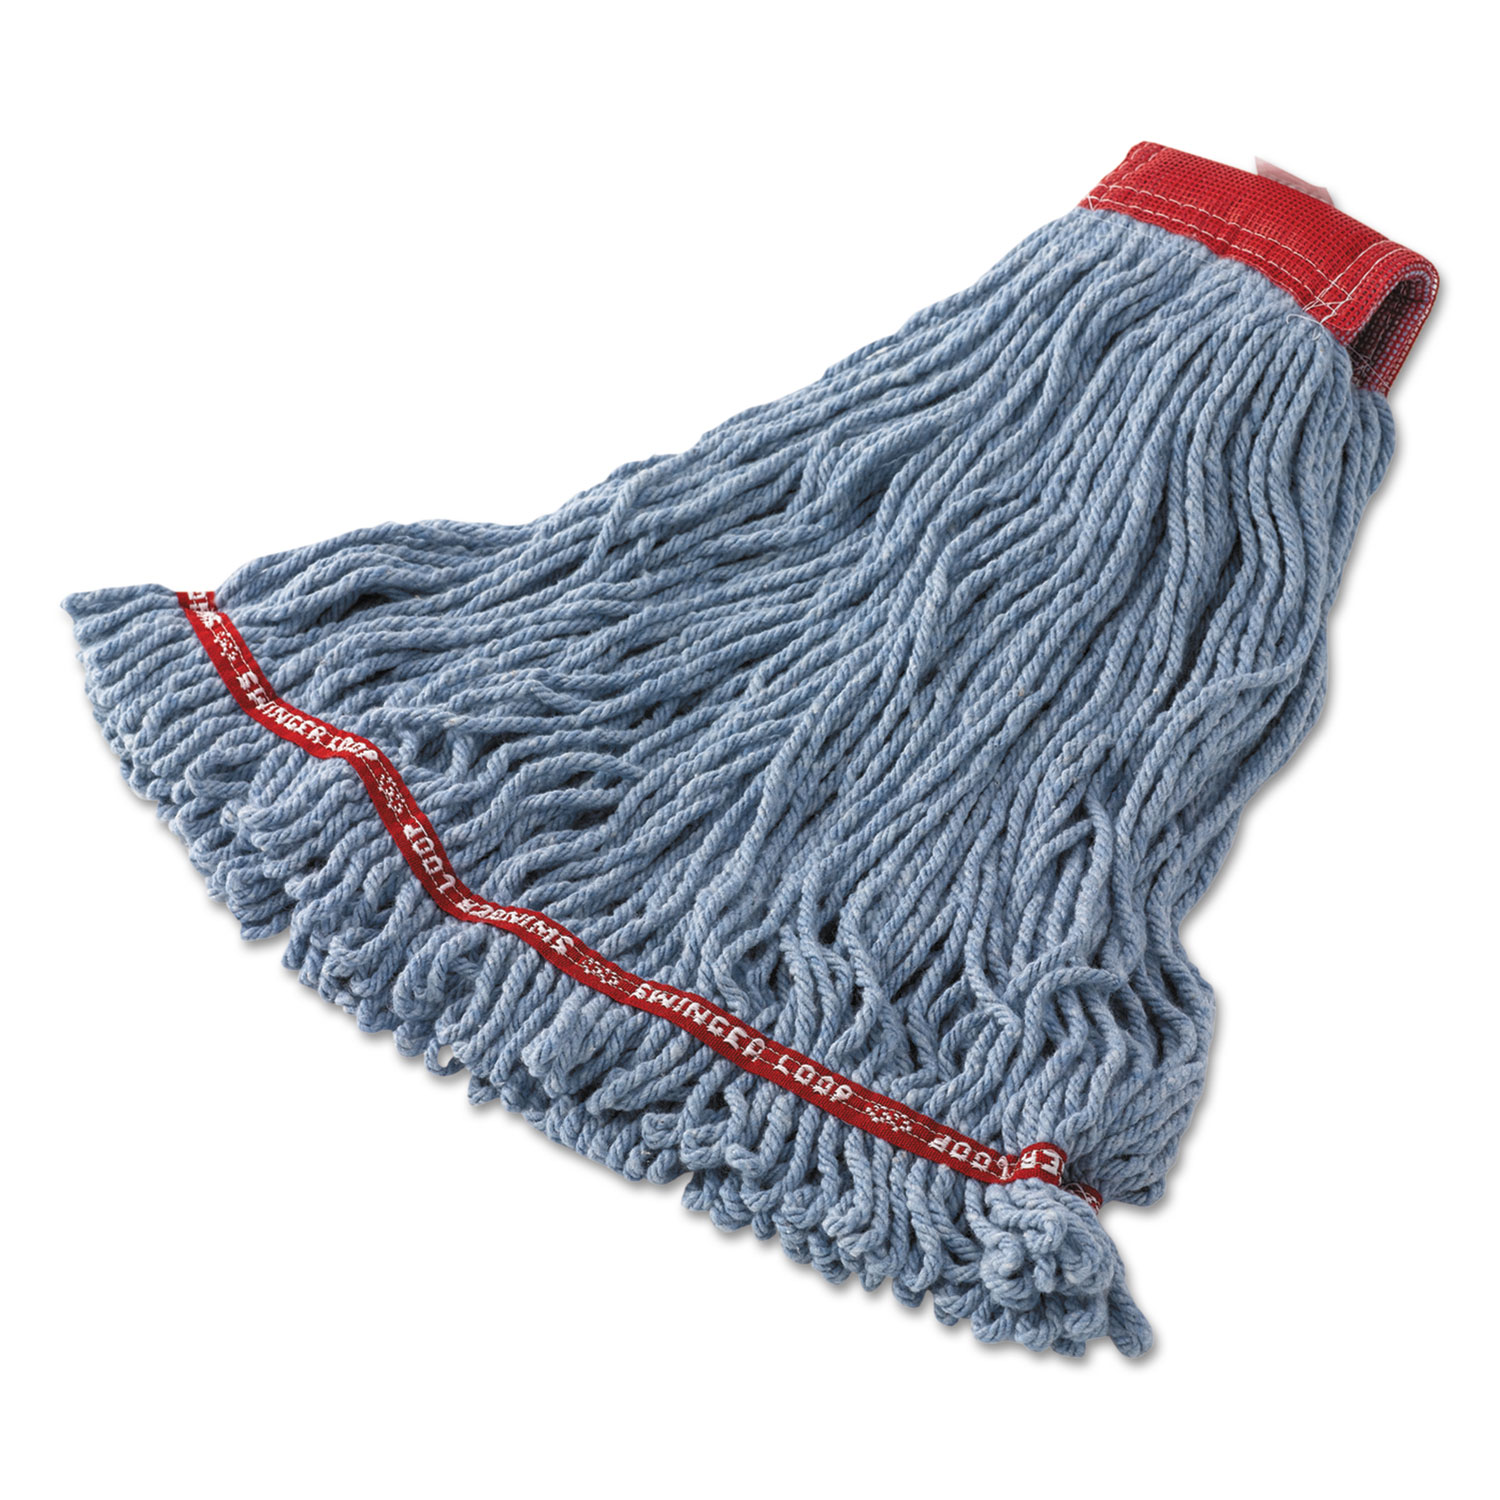  Rubbermaid Commercial FGC25306BL00 Swinger Loop Shrinkless Mop Heads, Cotton/Synthetic, Blue, Large, 6/Carton (RCPC253BLU) 